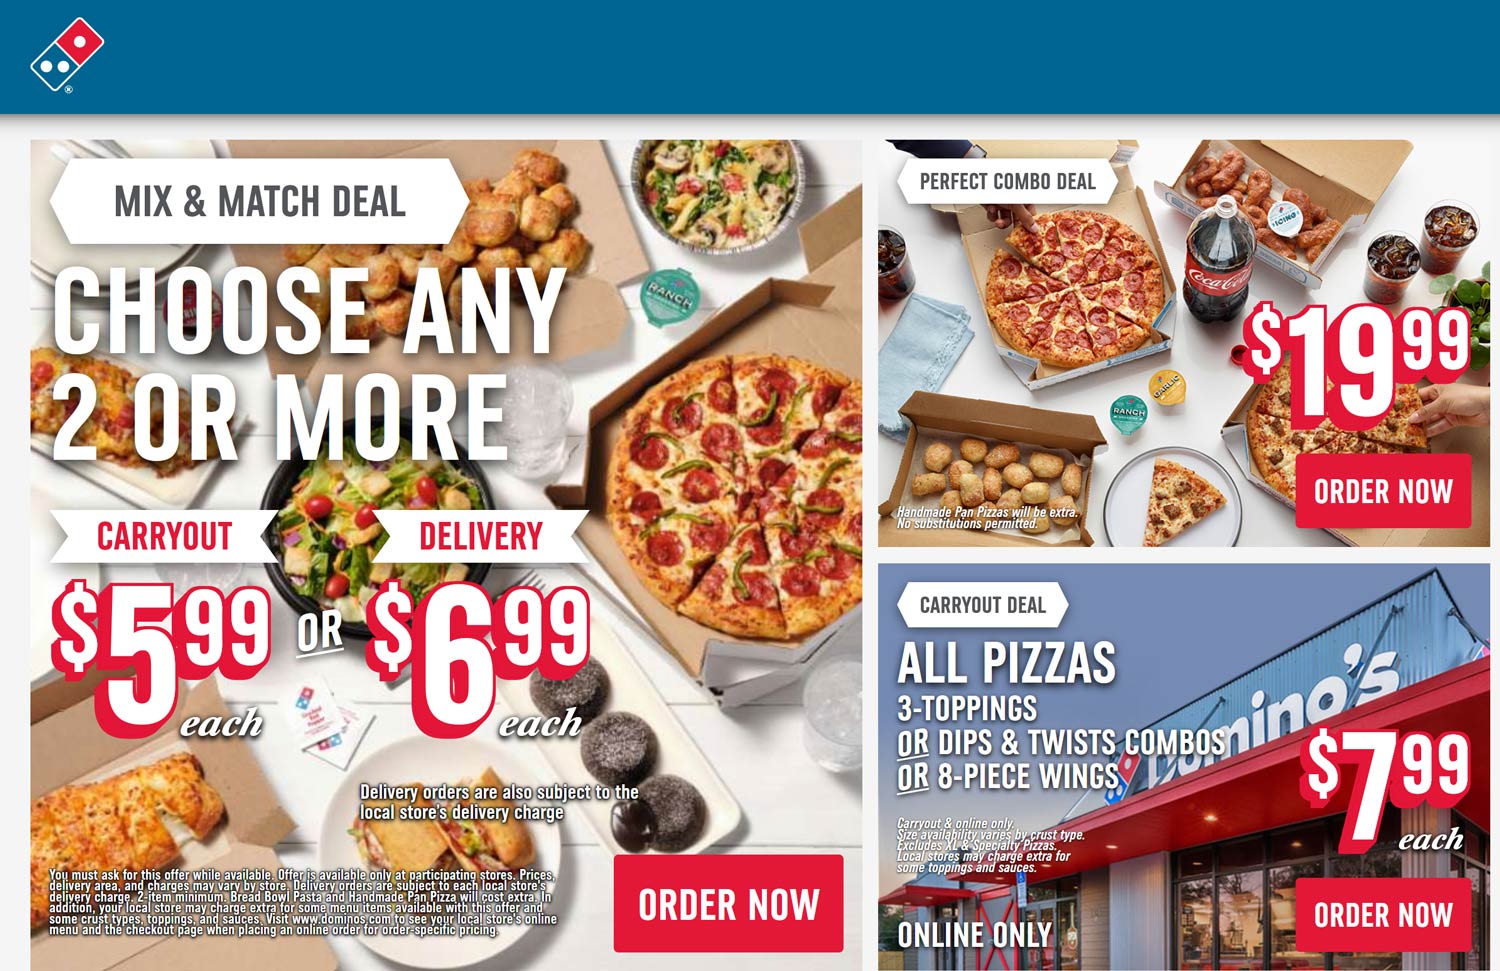 Dominos restaurants Coupon  2 or more for $6 each at Dominos pizza #dominos 